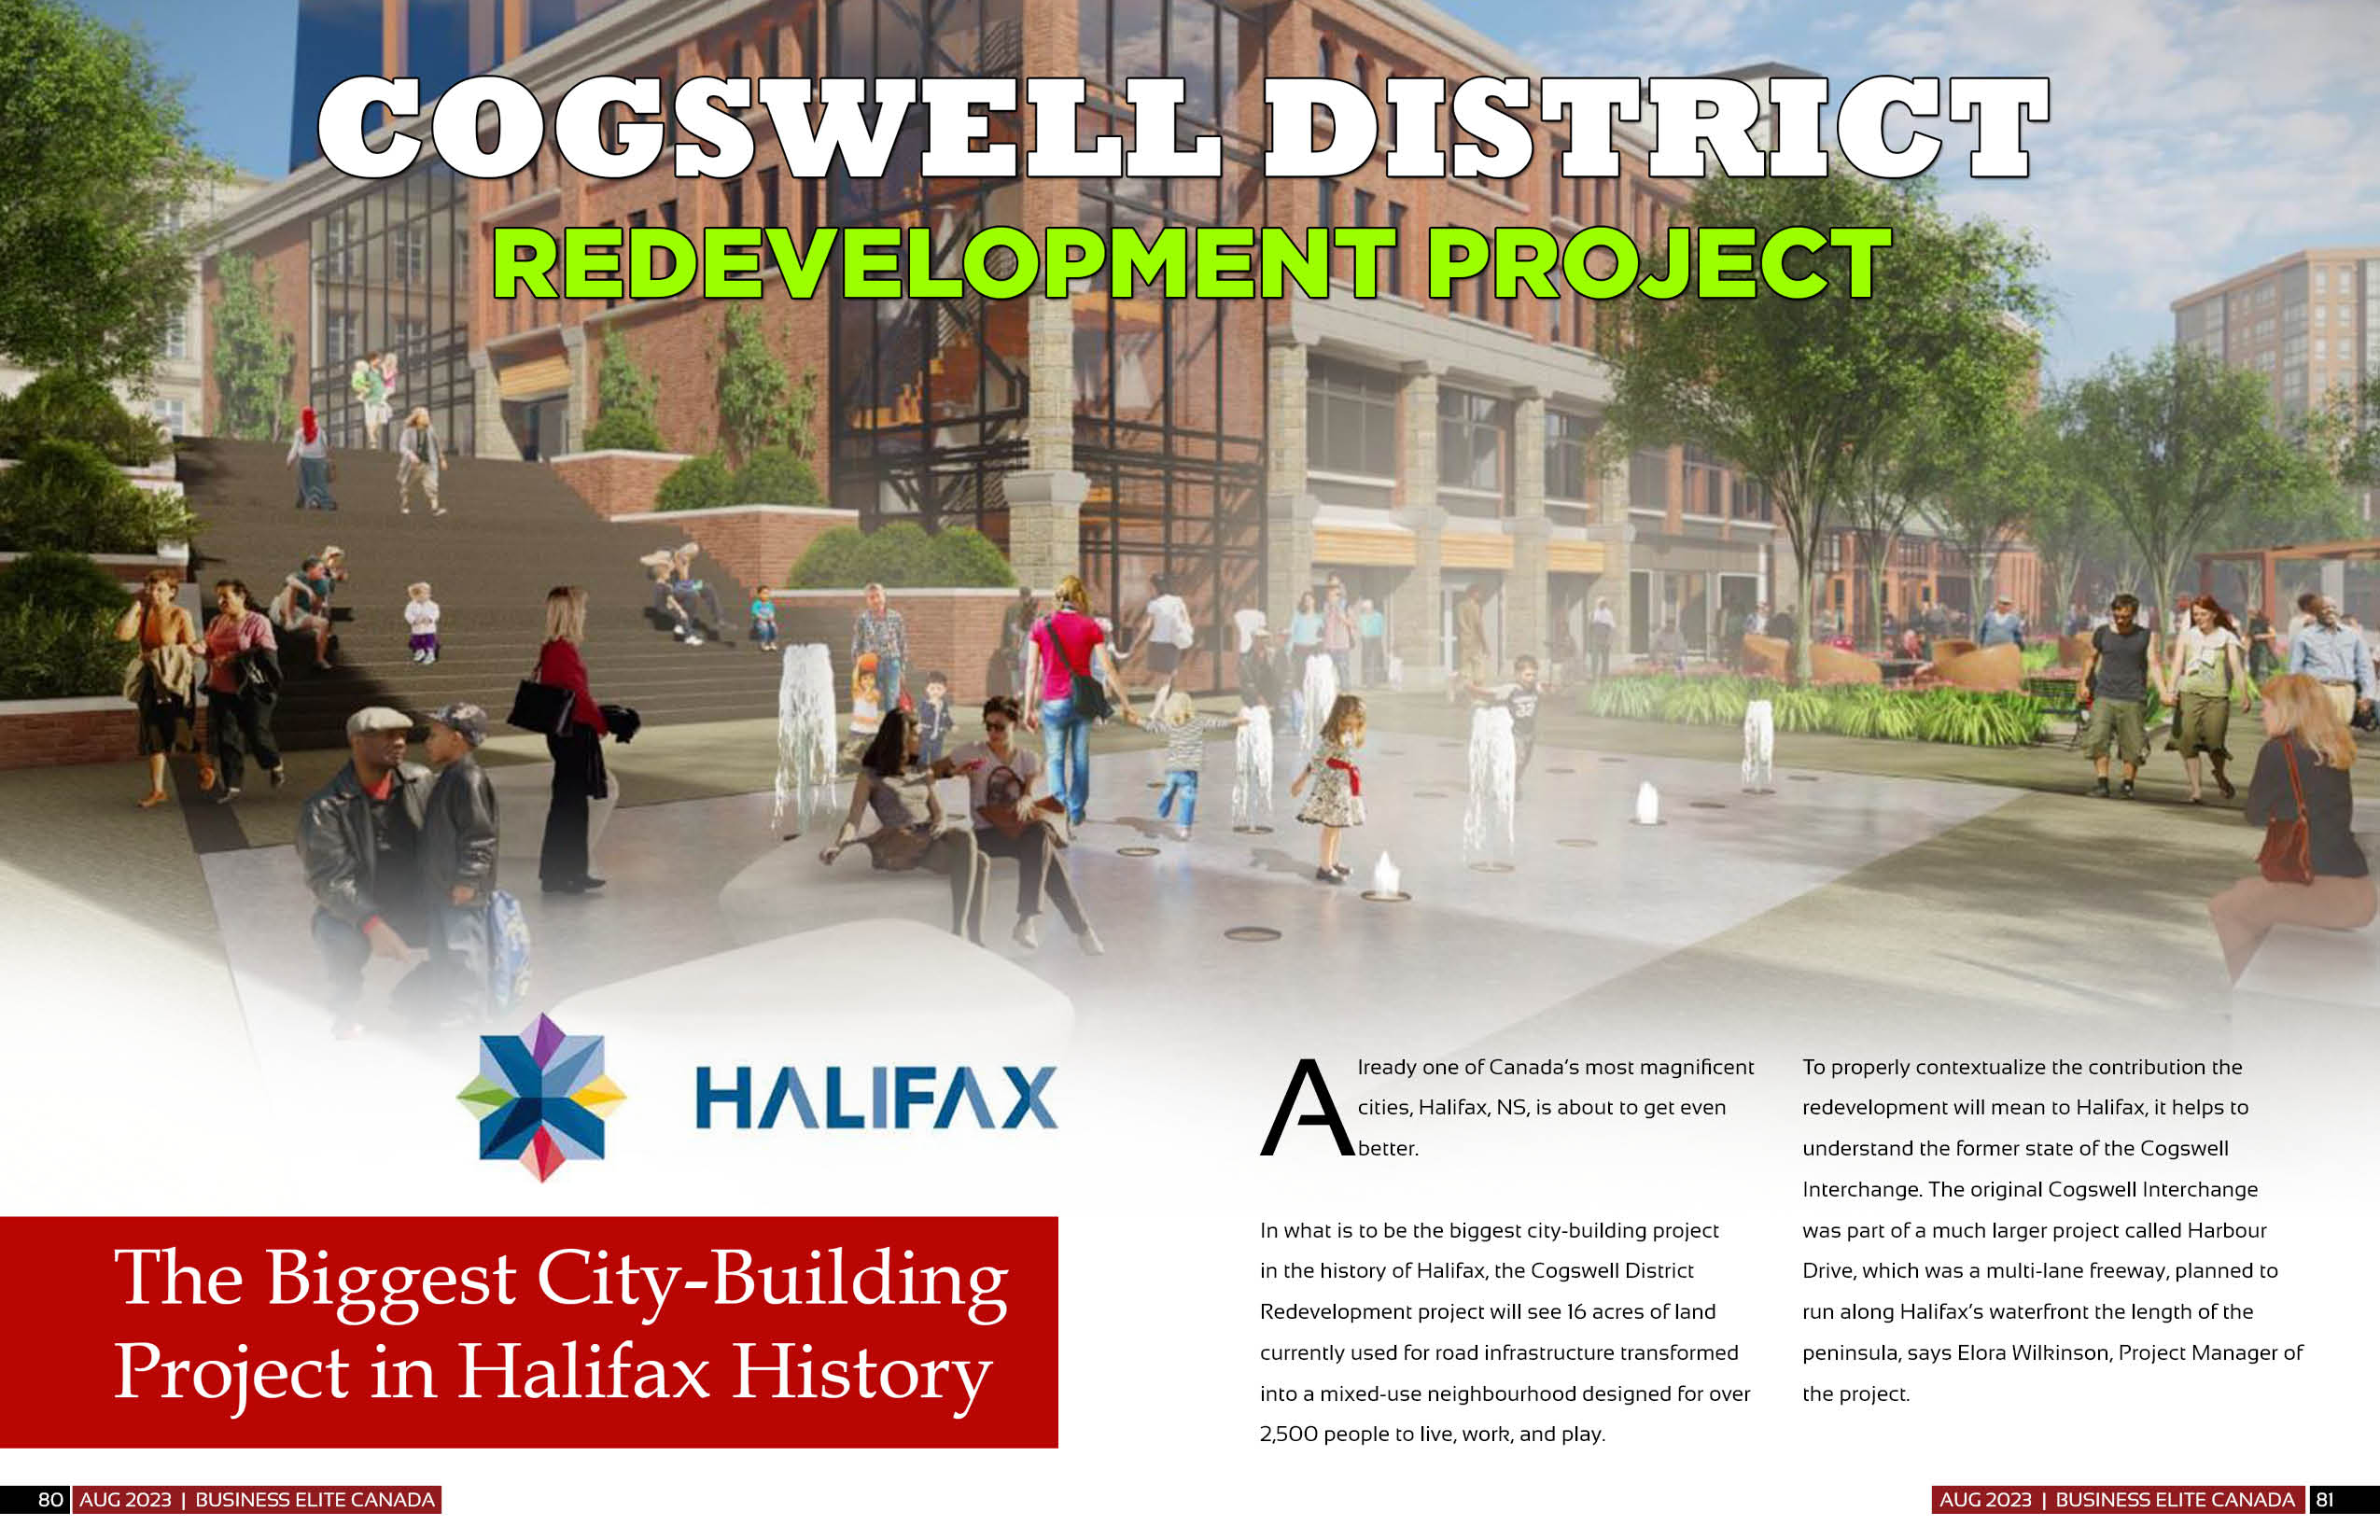 Halifax’s Cogswell District Redevelopment Project